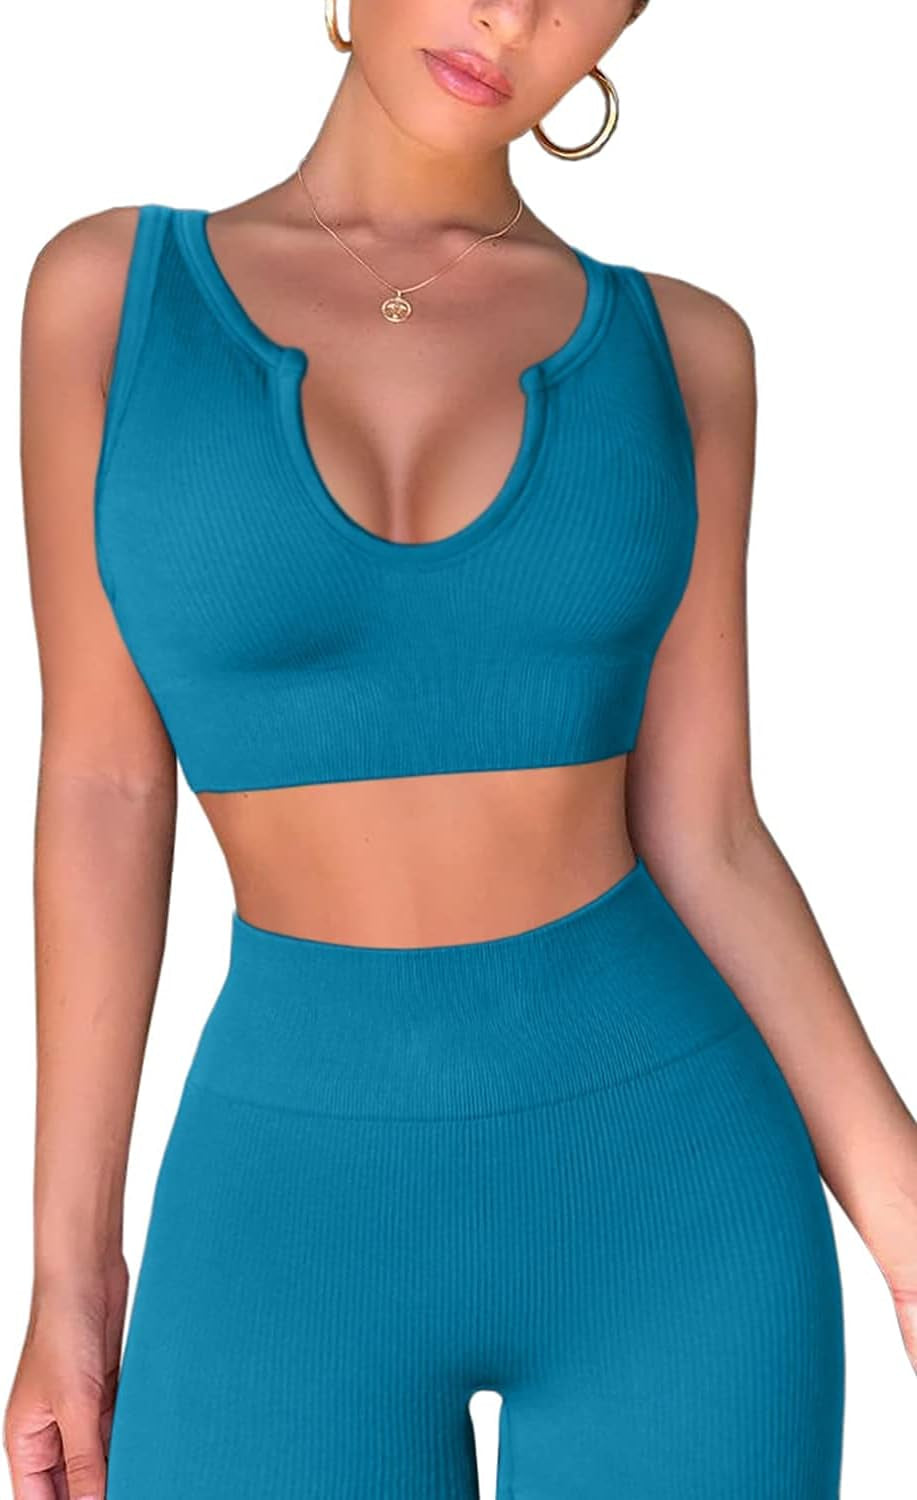 Professional title: "Women's High Waisted Leggings and Sports Bra Gym Set in Light Blue - Yoga Workout Outfit"